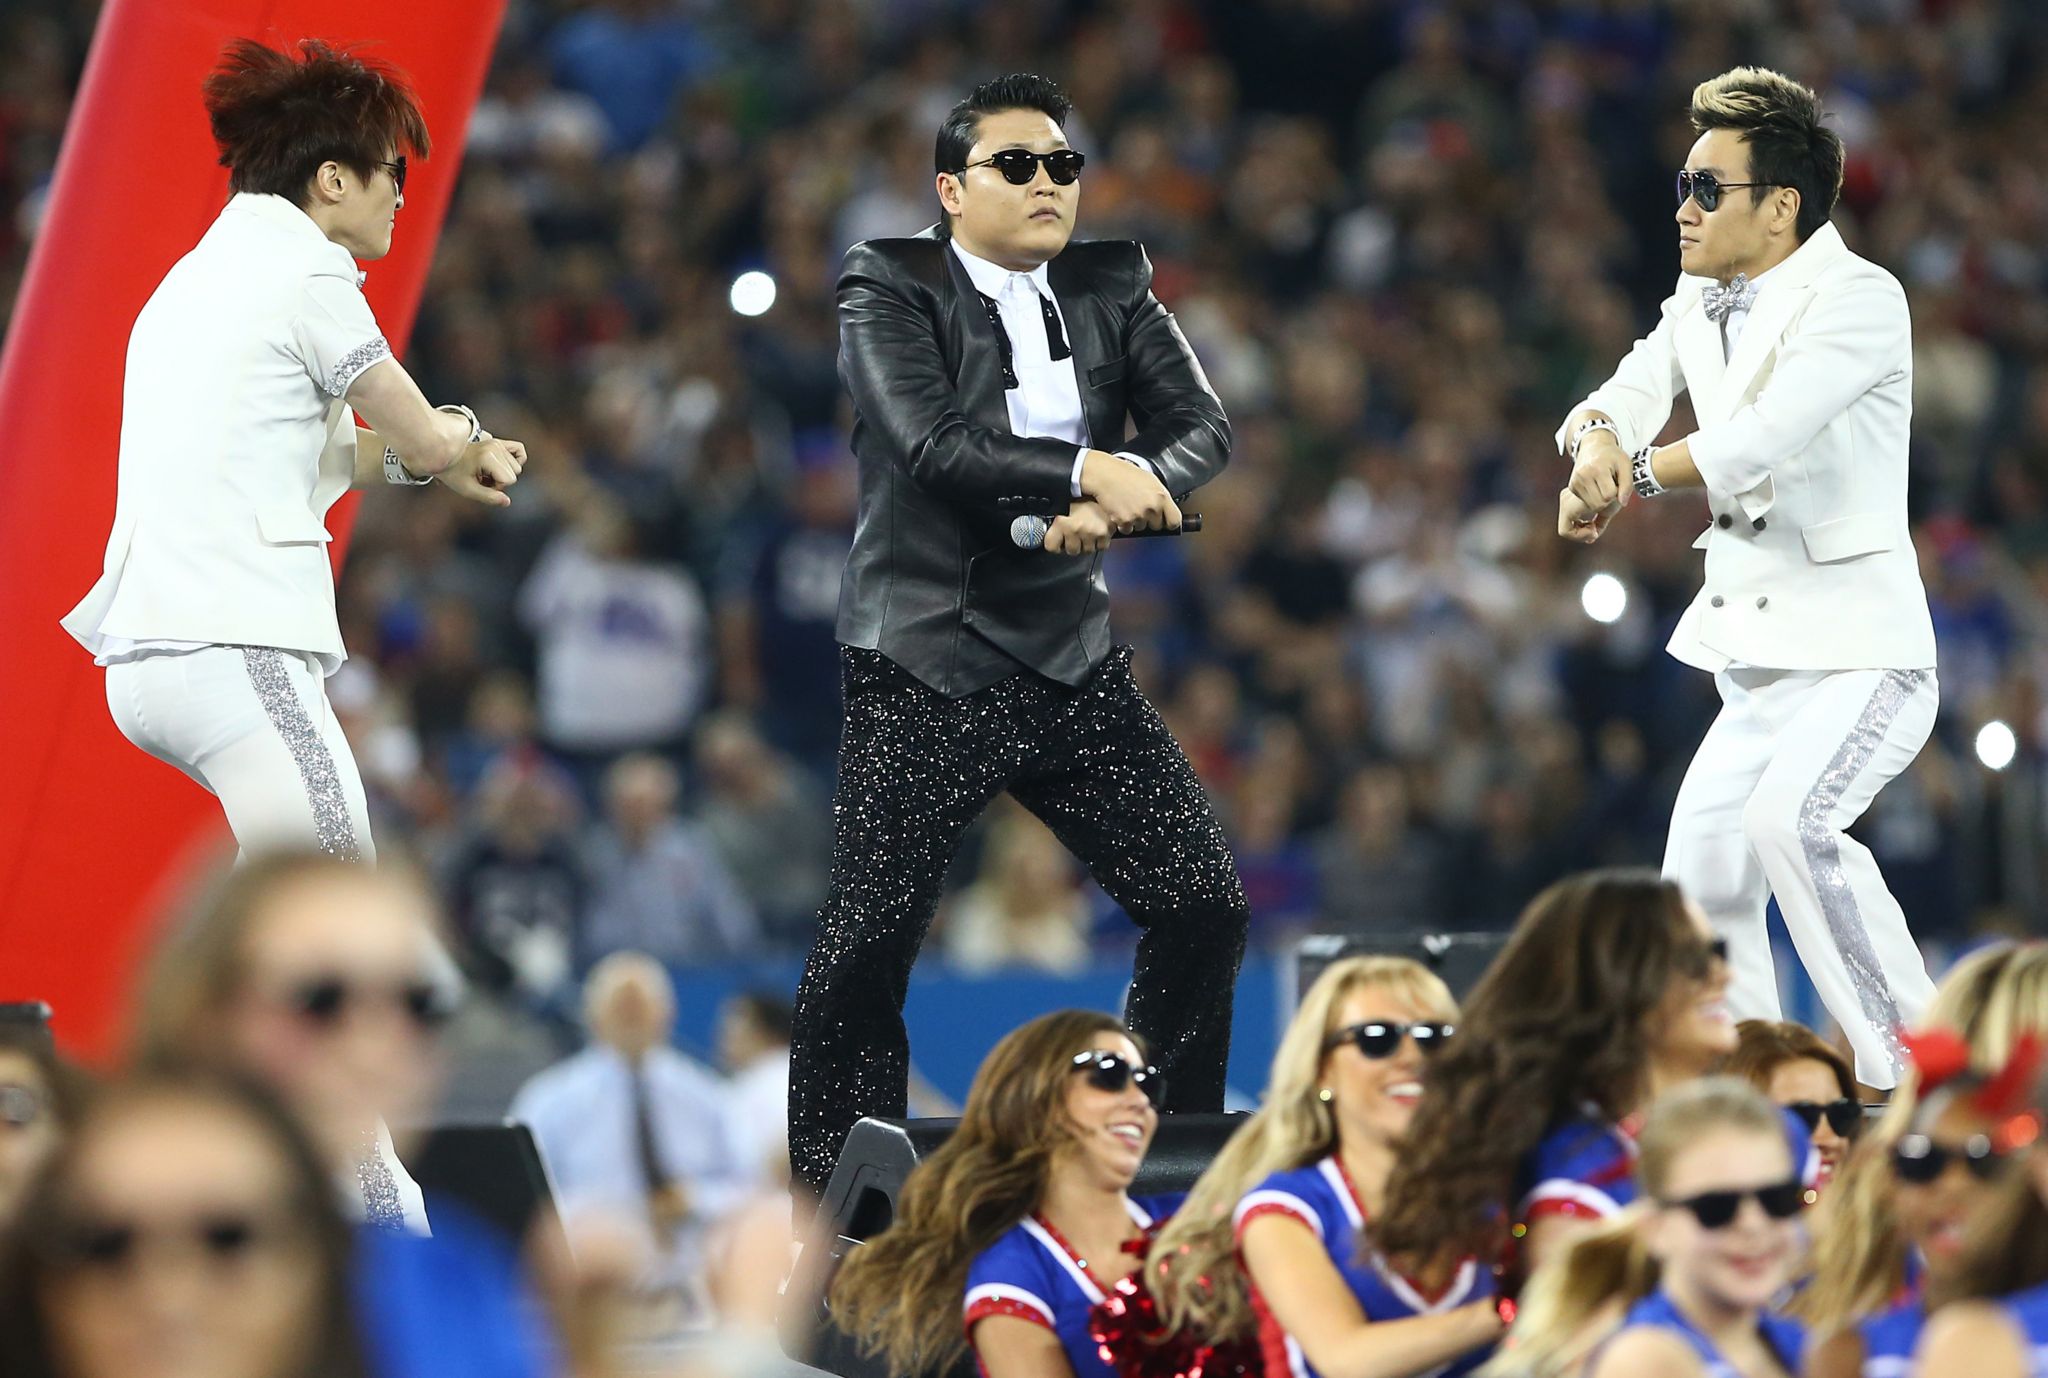 PSY performs Gangnam Style at a Buffalo Bills NFL game in December 2012